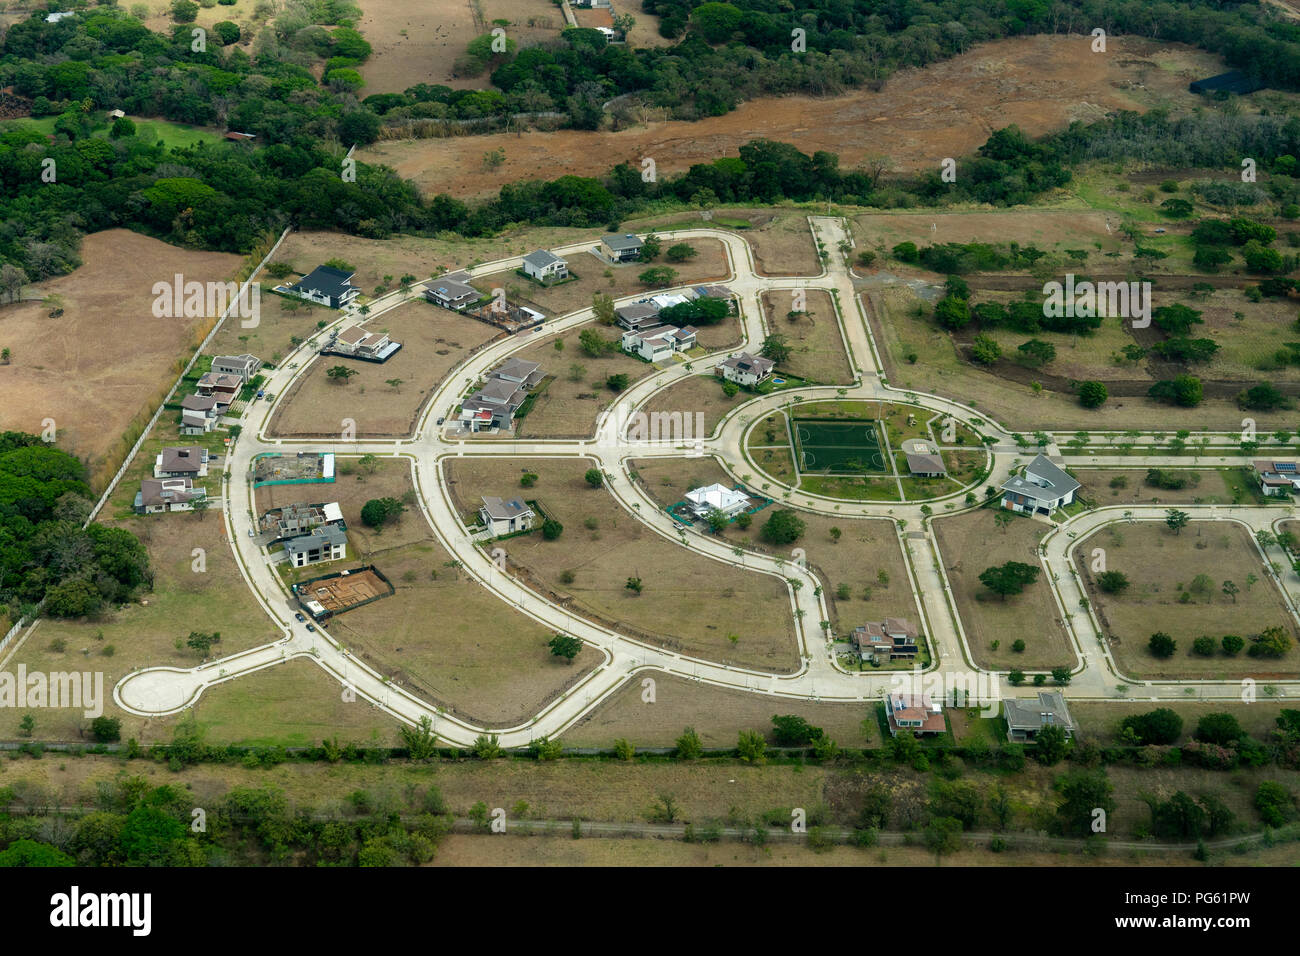 New Housing by San Jose Airport, Costa Rica Stock Photo